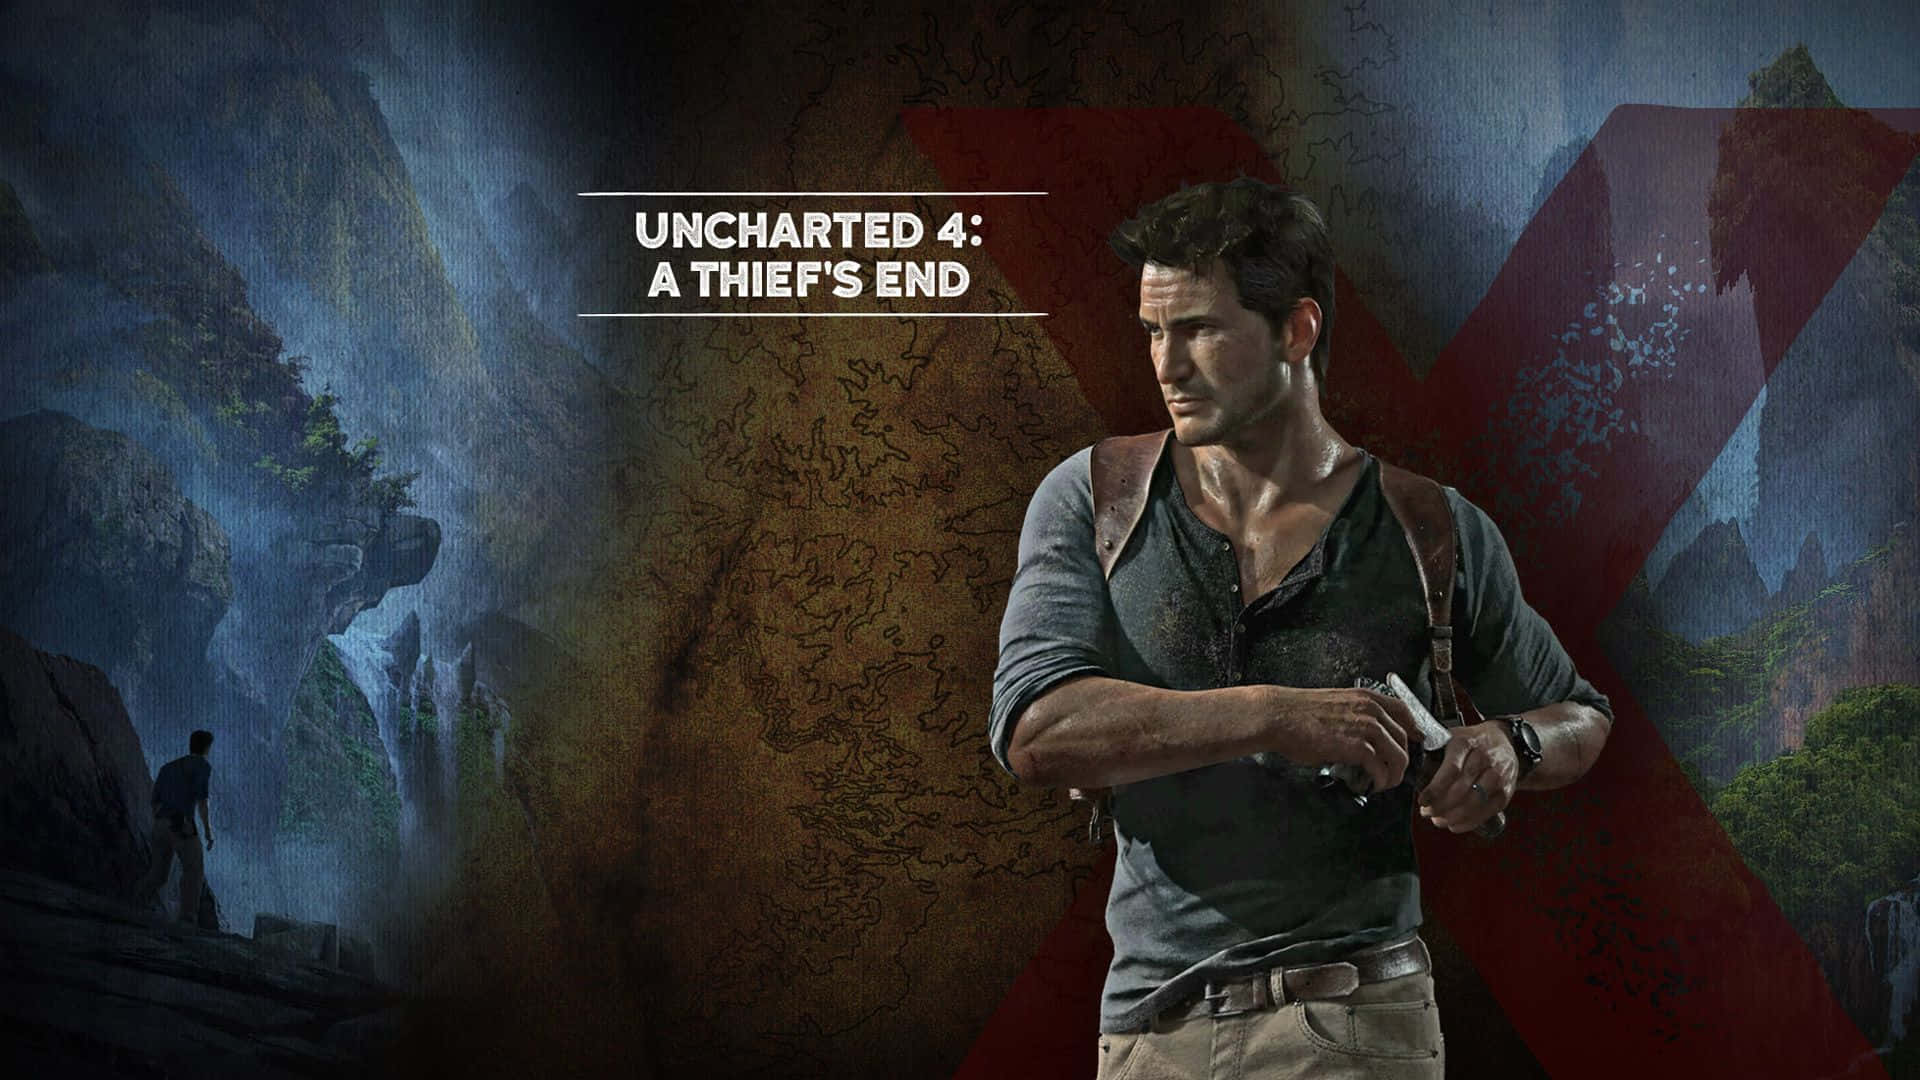 543557 1920x1080 uncharted uncharted 4 a thiefs end nathan drake video  games wallpaper JPG 335 kB - Rare Gallery HD Wallpapers